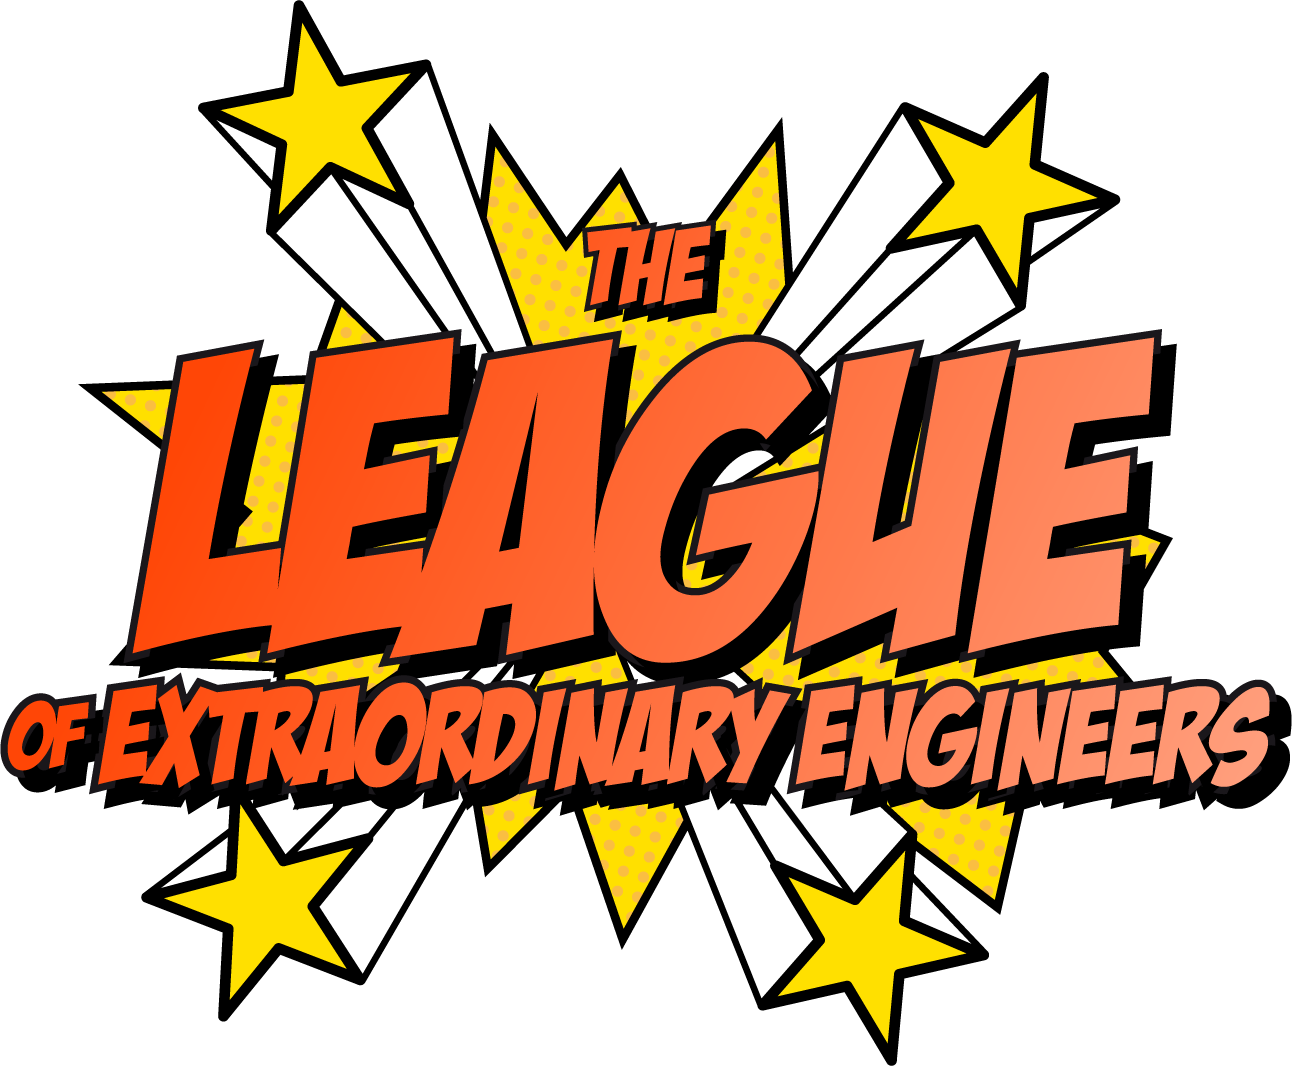 The League of Extraordinary Engineers